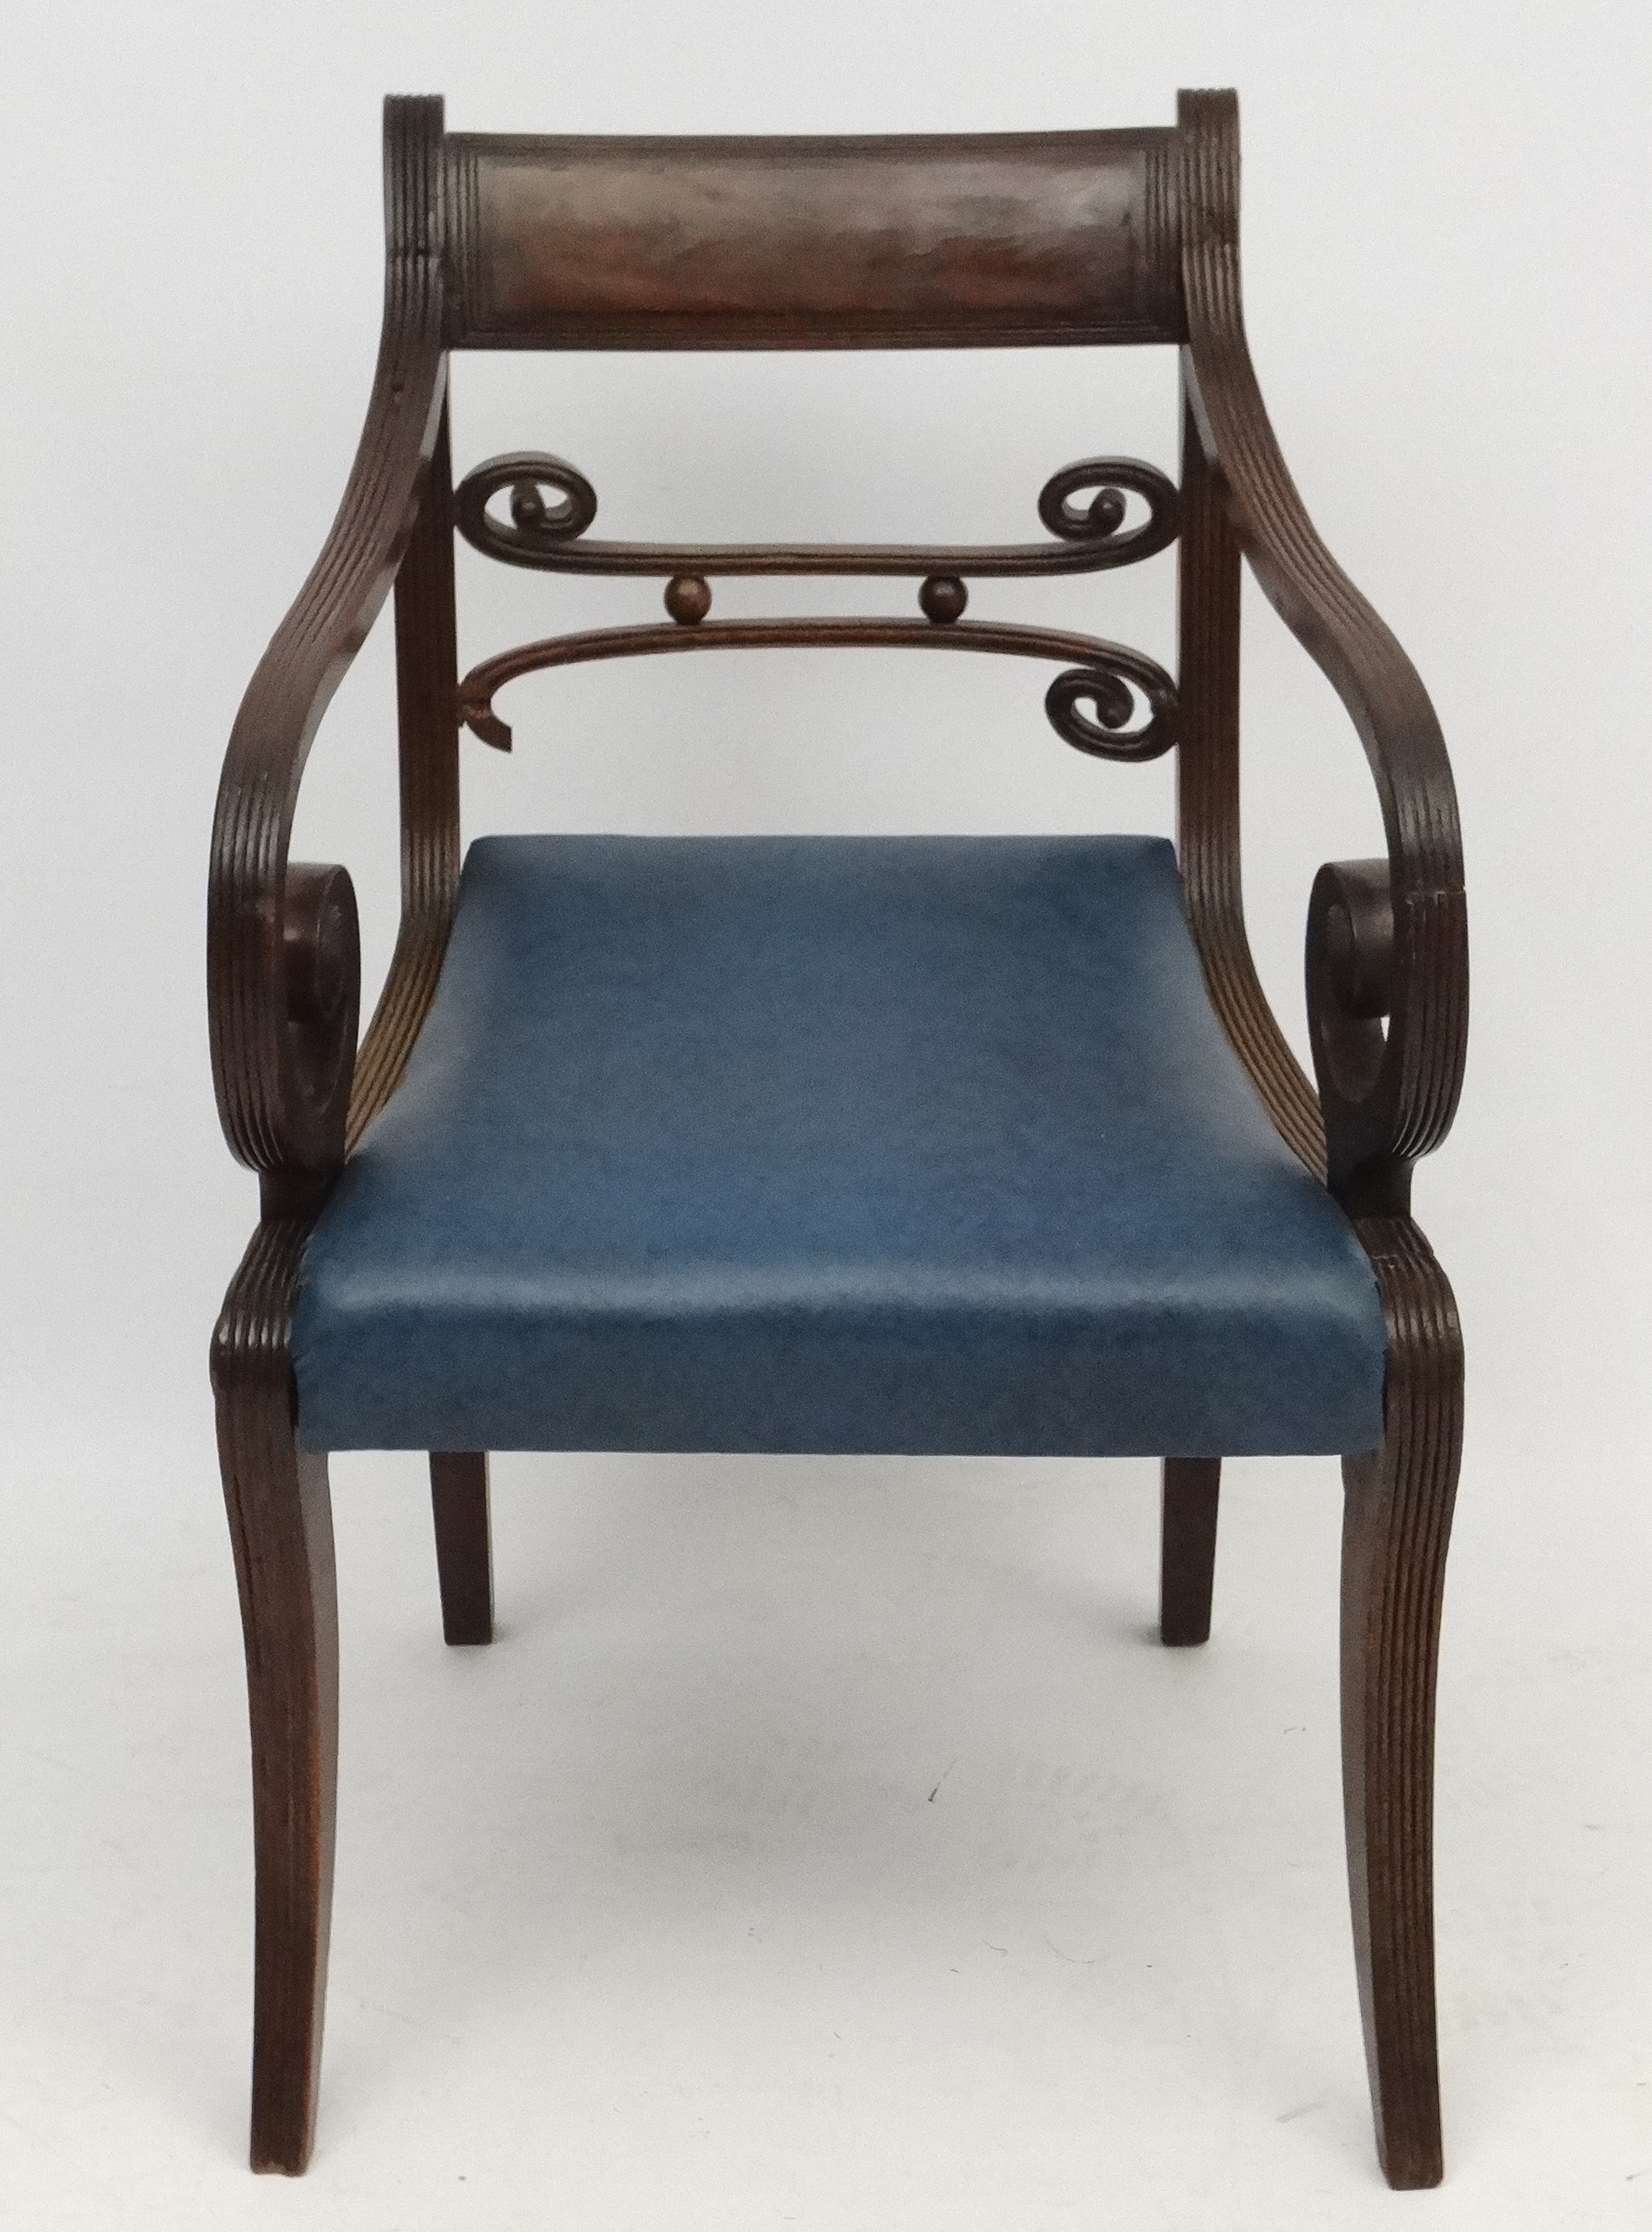 A Regency mahogany open arm / carver chair with sabre legs and drop in seats 32 1/2" high - Image 3 of 5